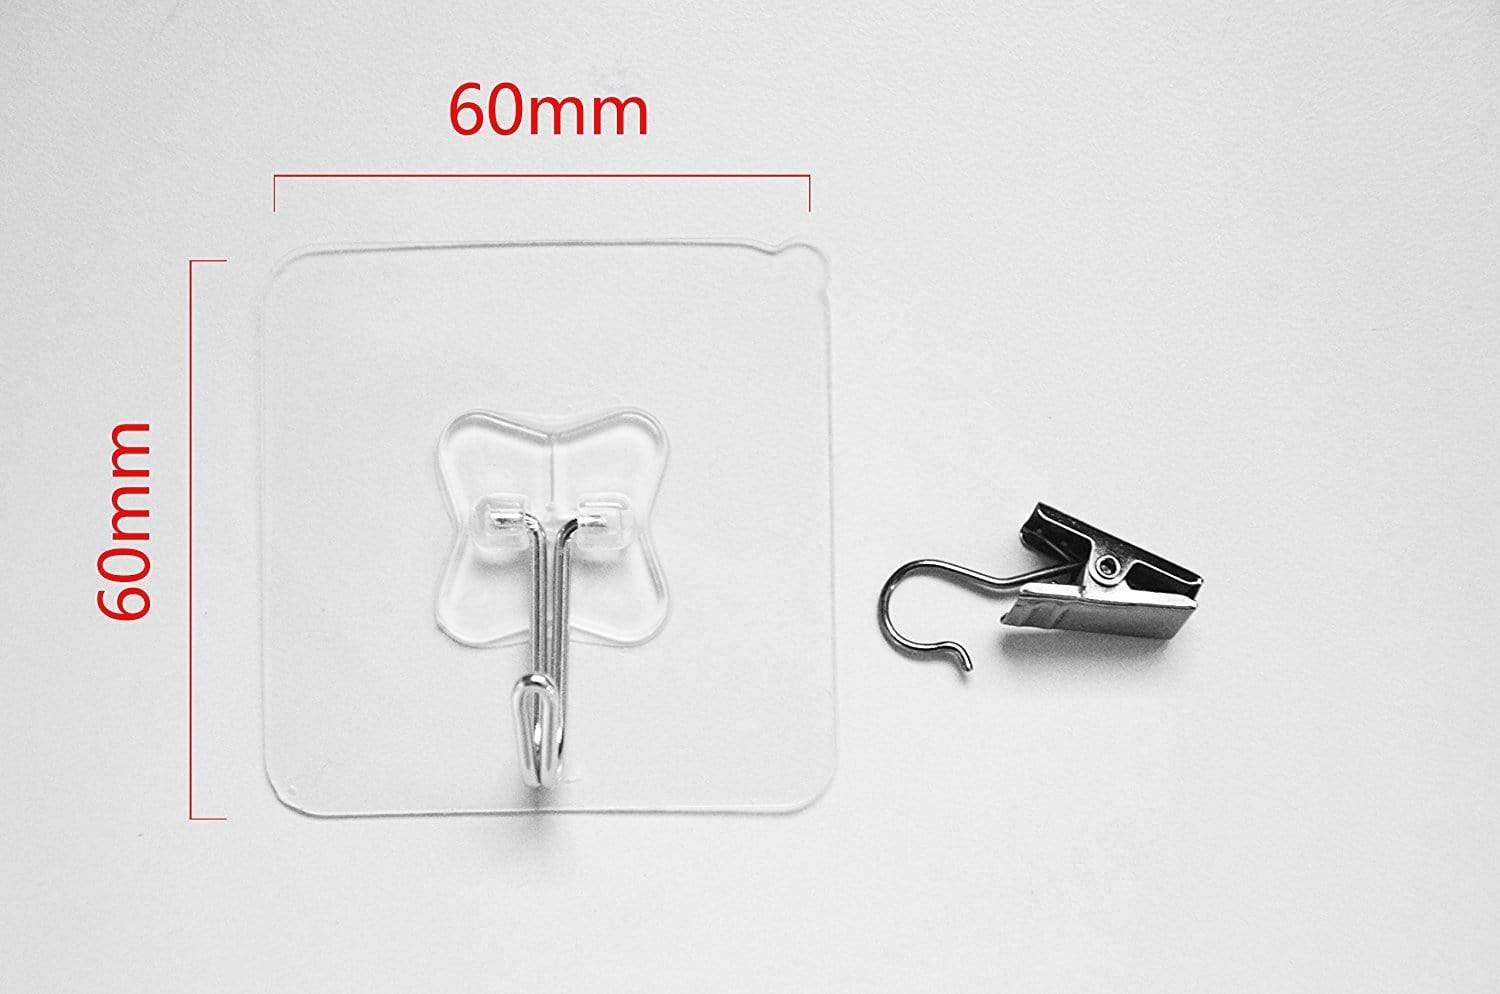 Katebackdrop£ºKate 4/group Support Clamps Clips Backgrounds Support Photo Backdrops Holder